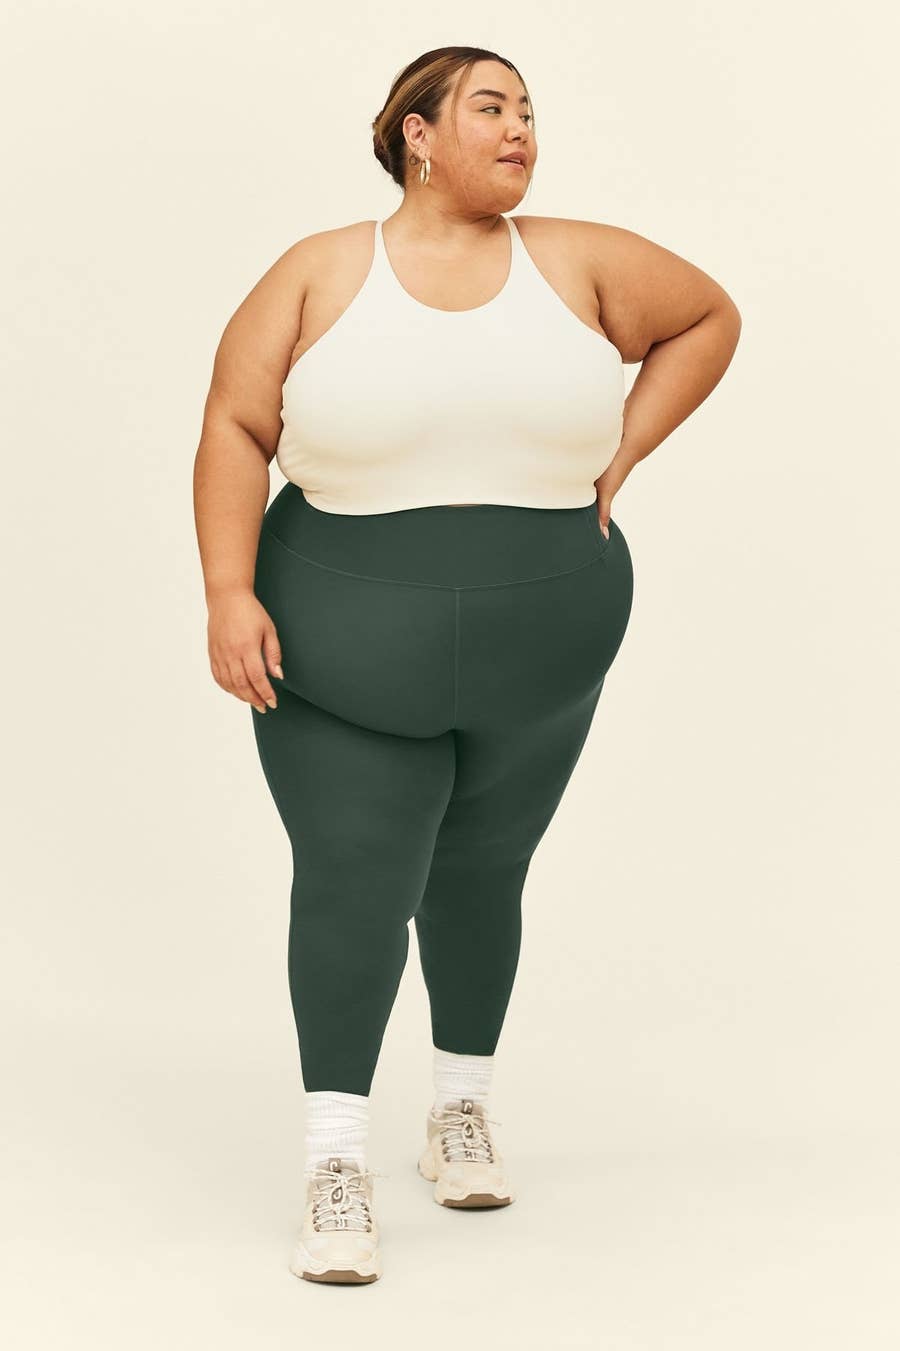 What Are The Best Leggings For Thick Girls?